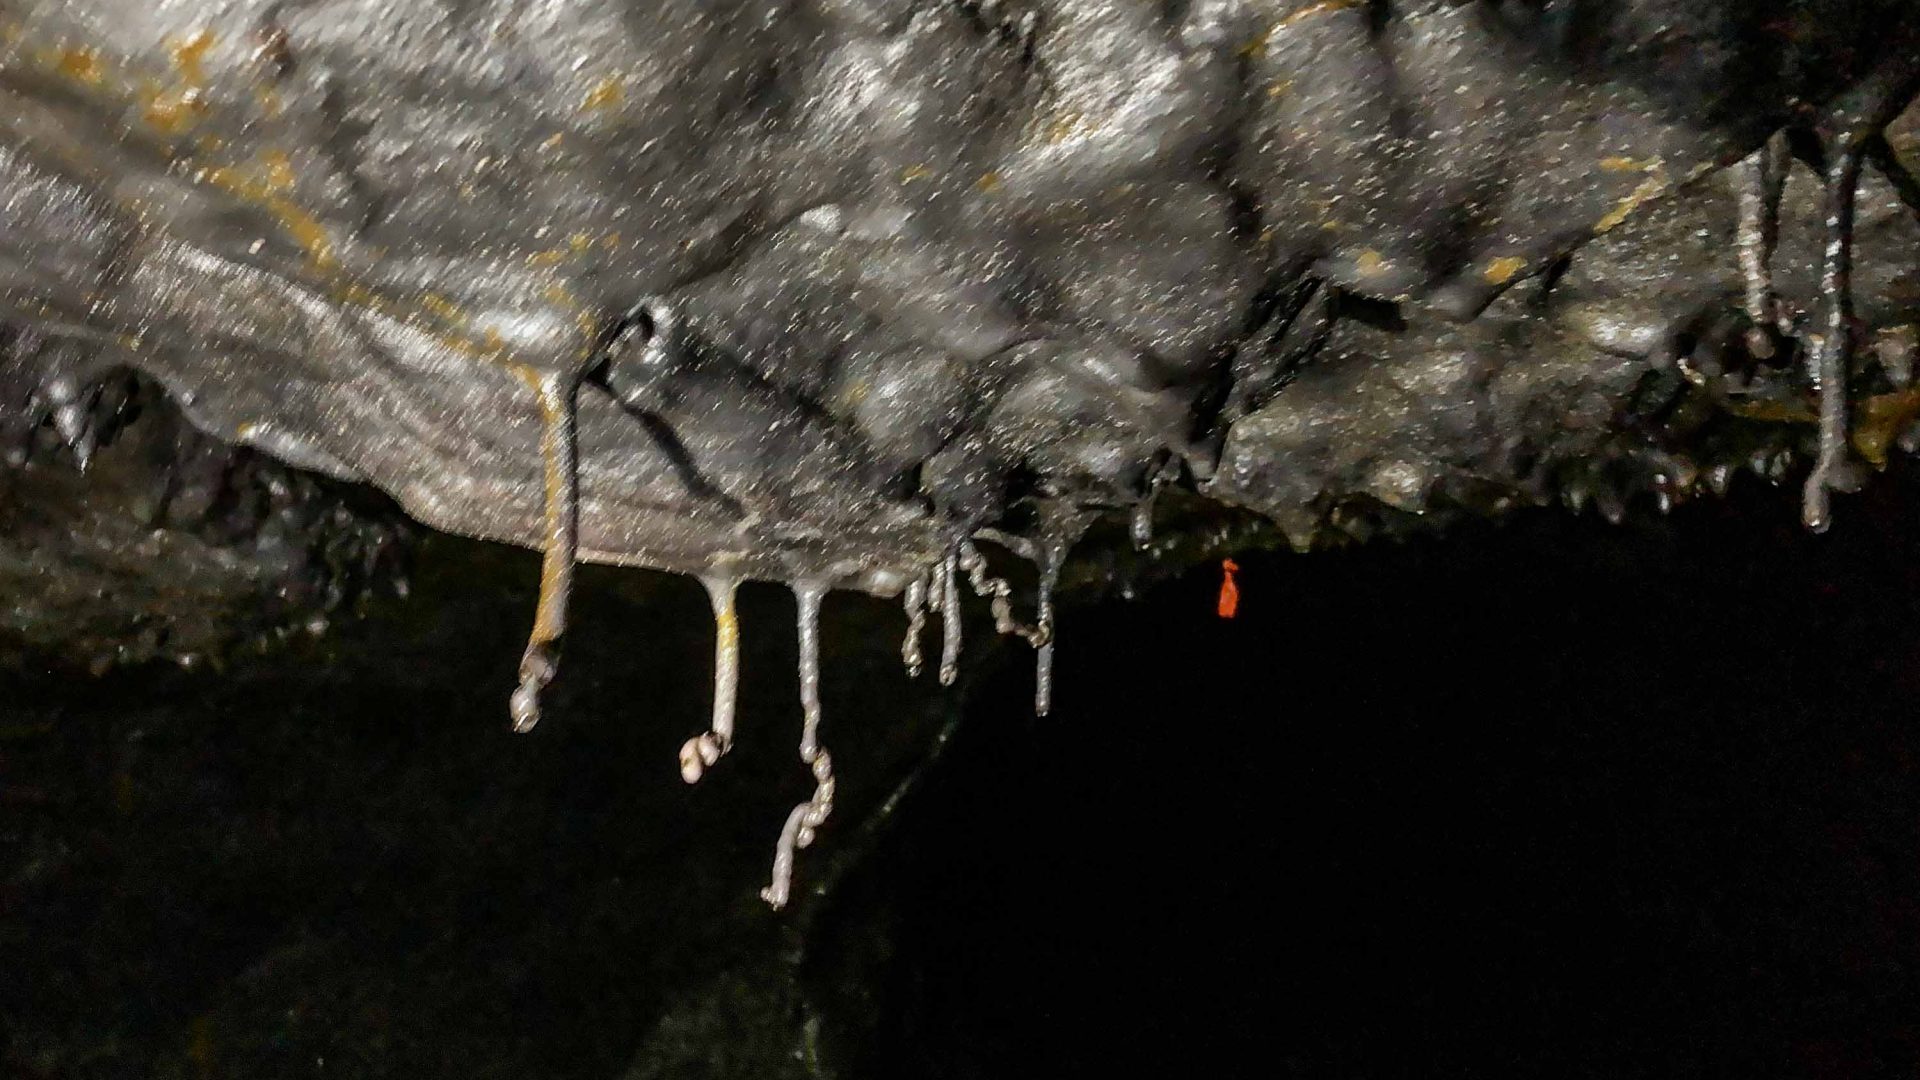 Cave straws hang from the roof of a dark cave.